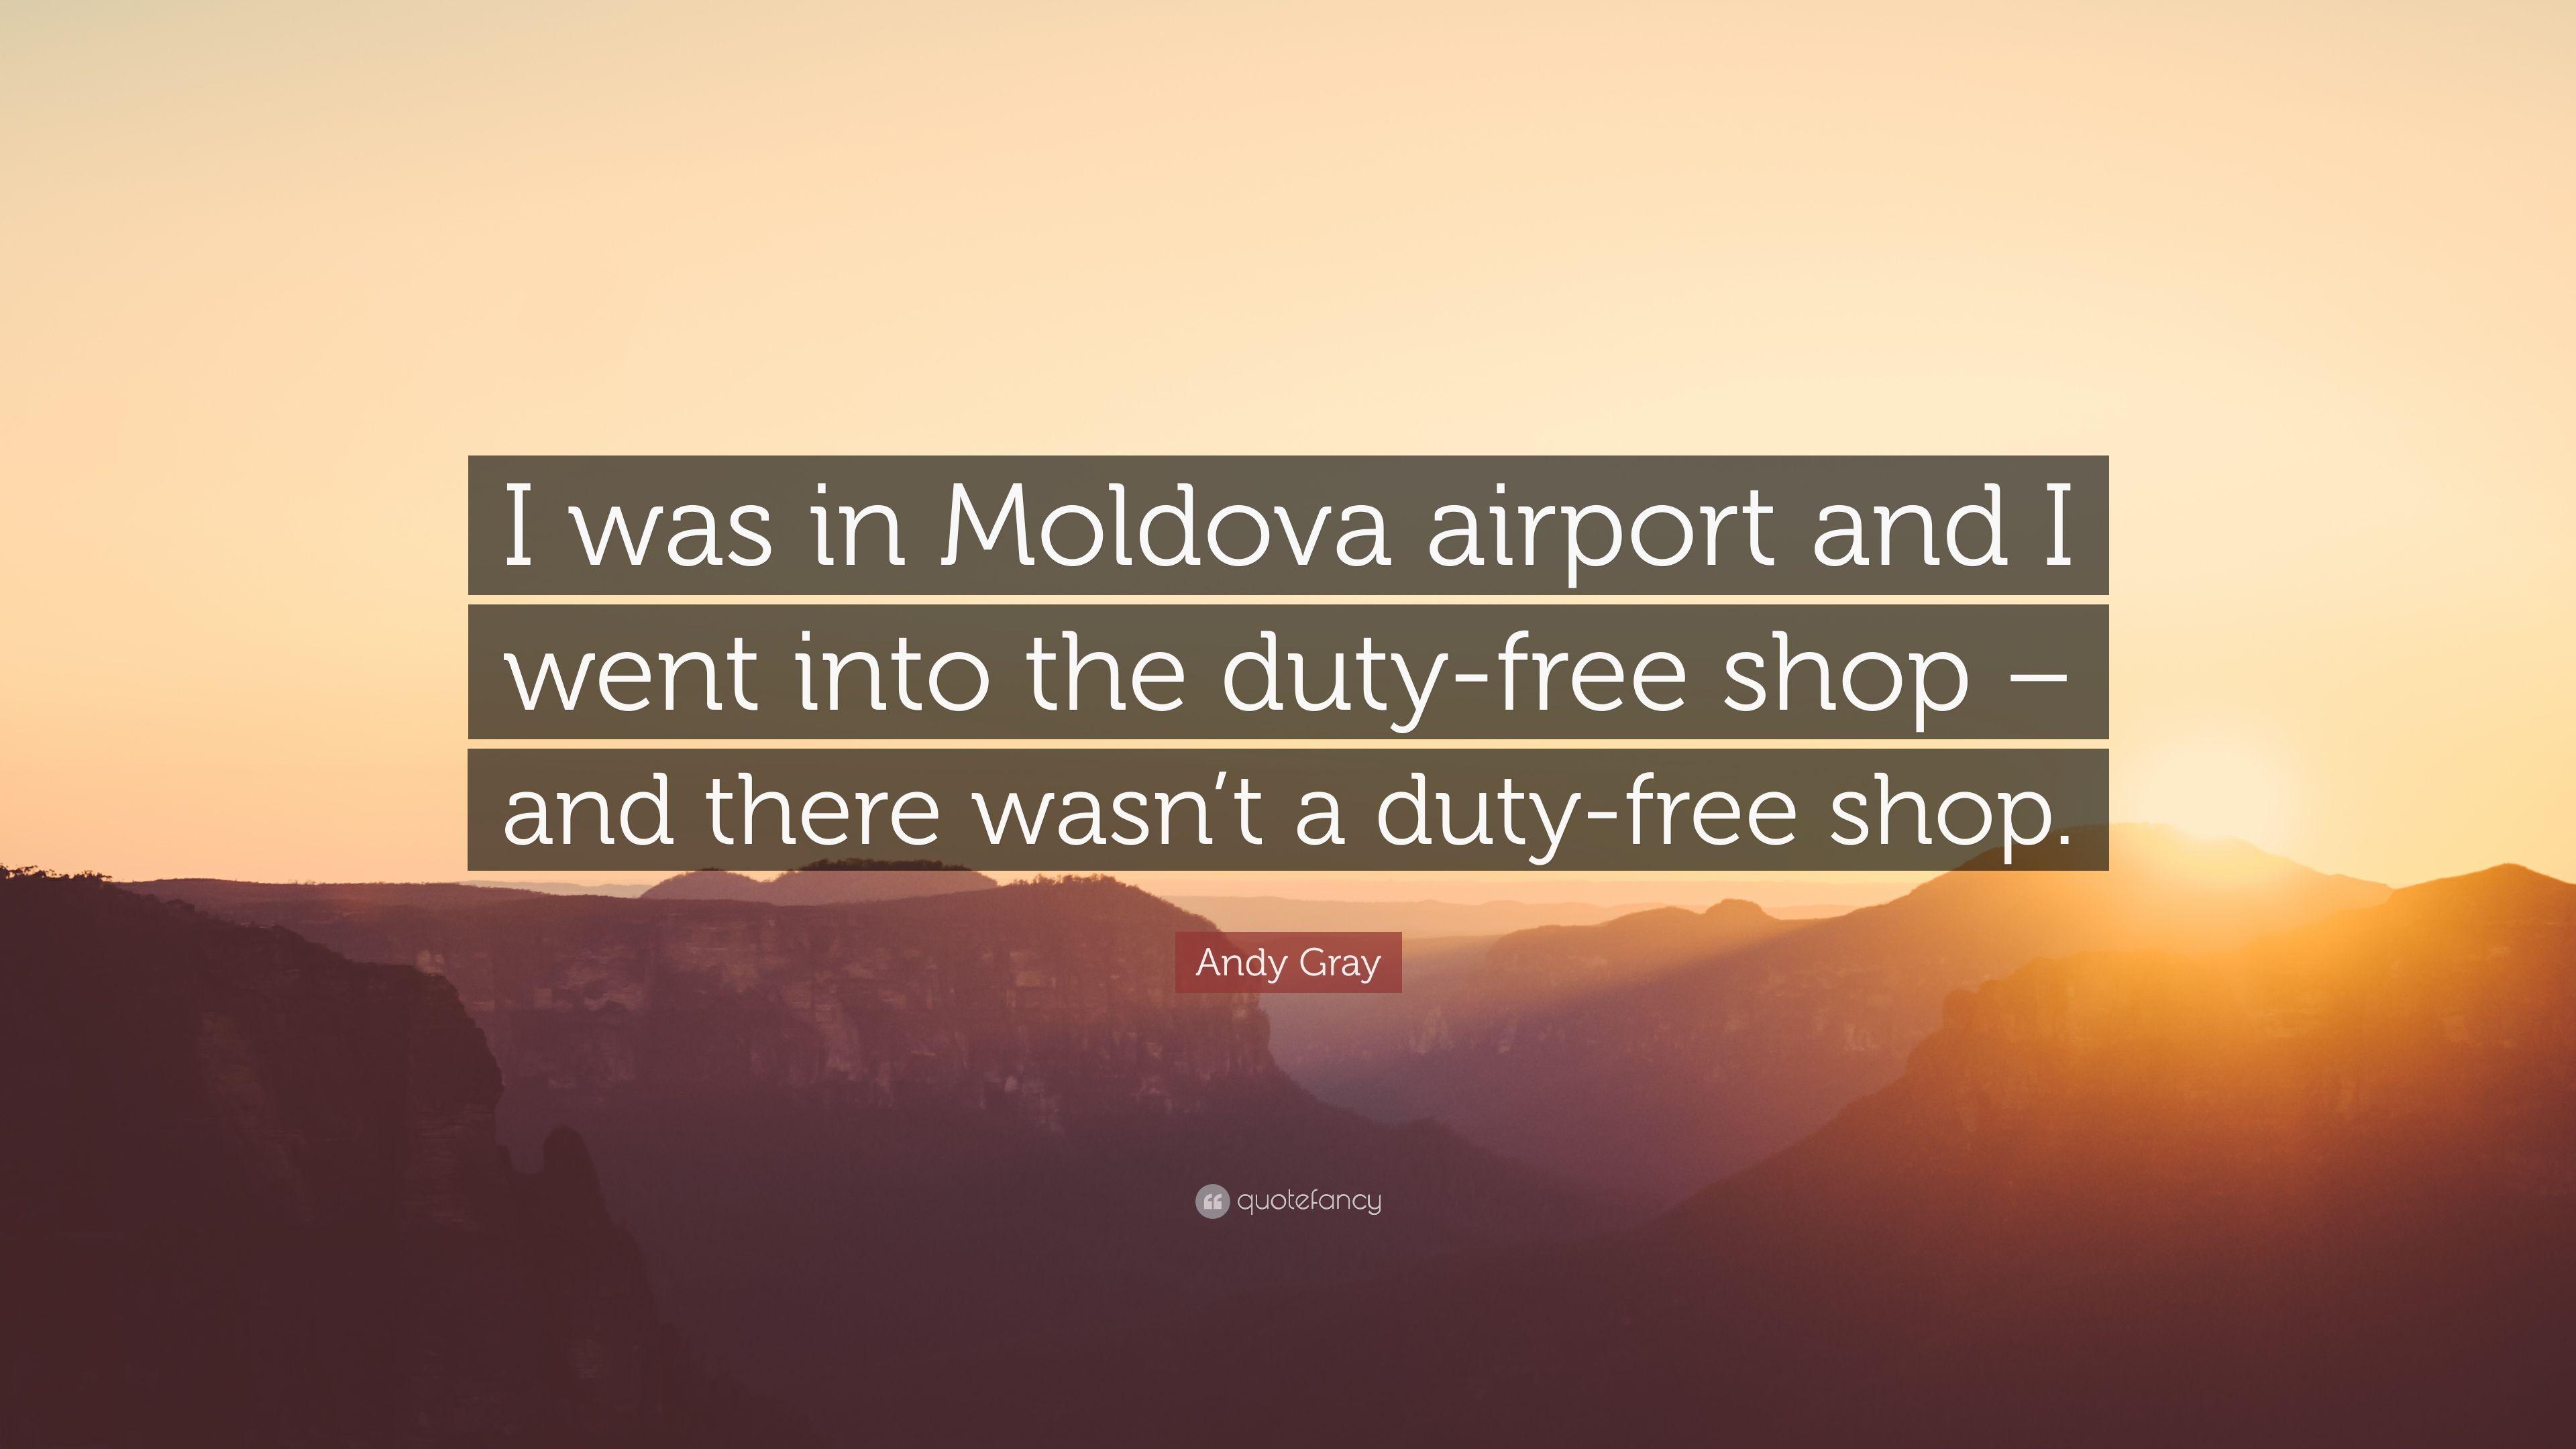 Andy Gray Quote: “I was in Moldova airport and I went into